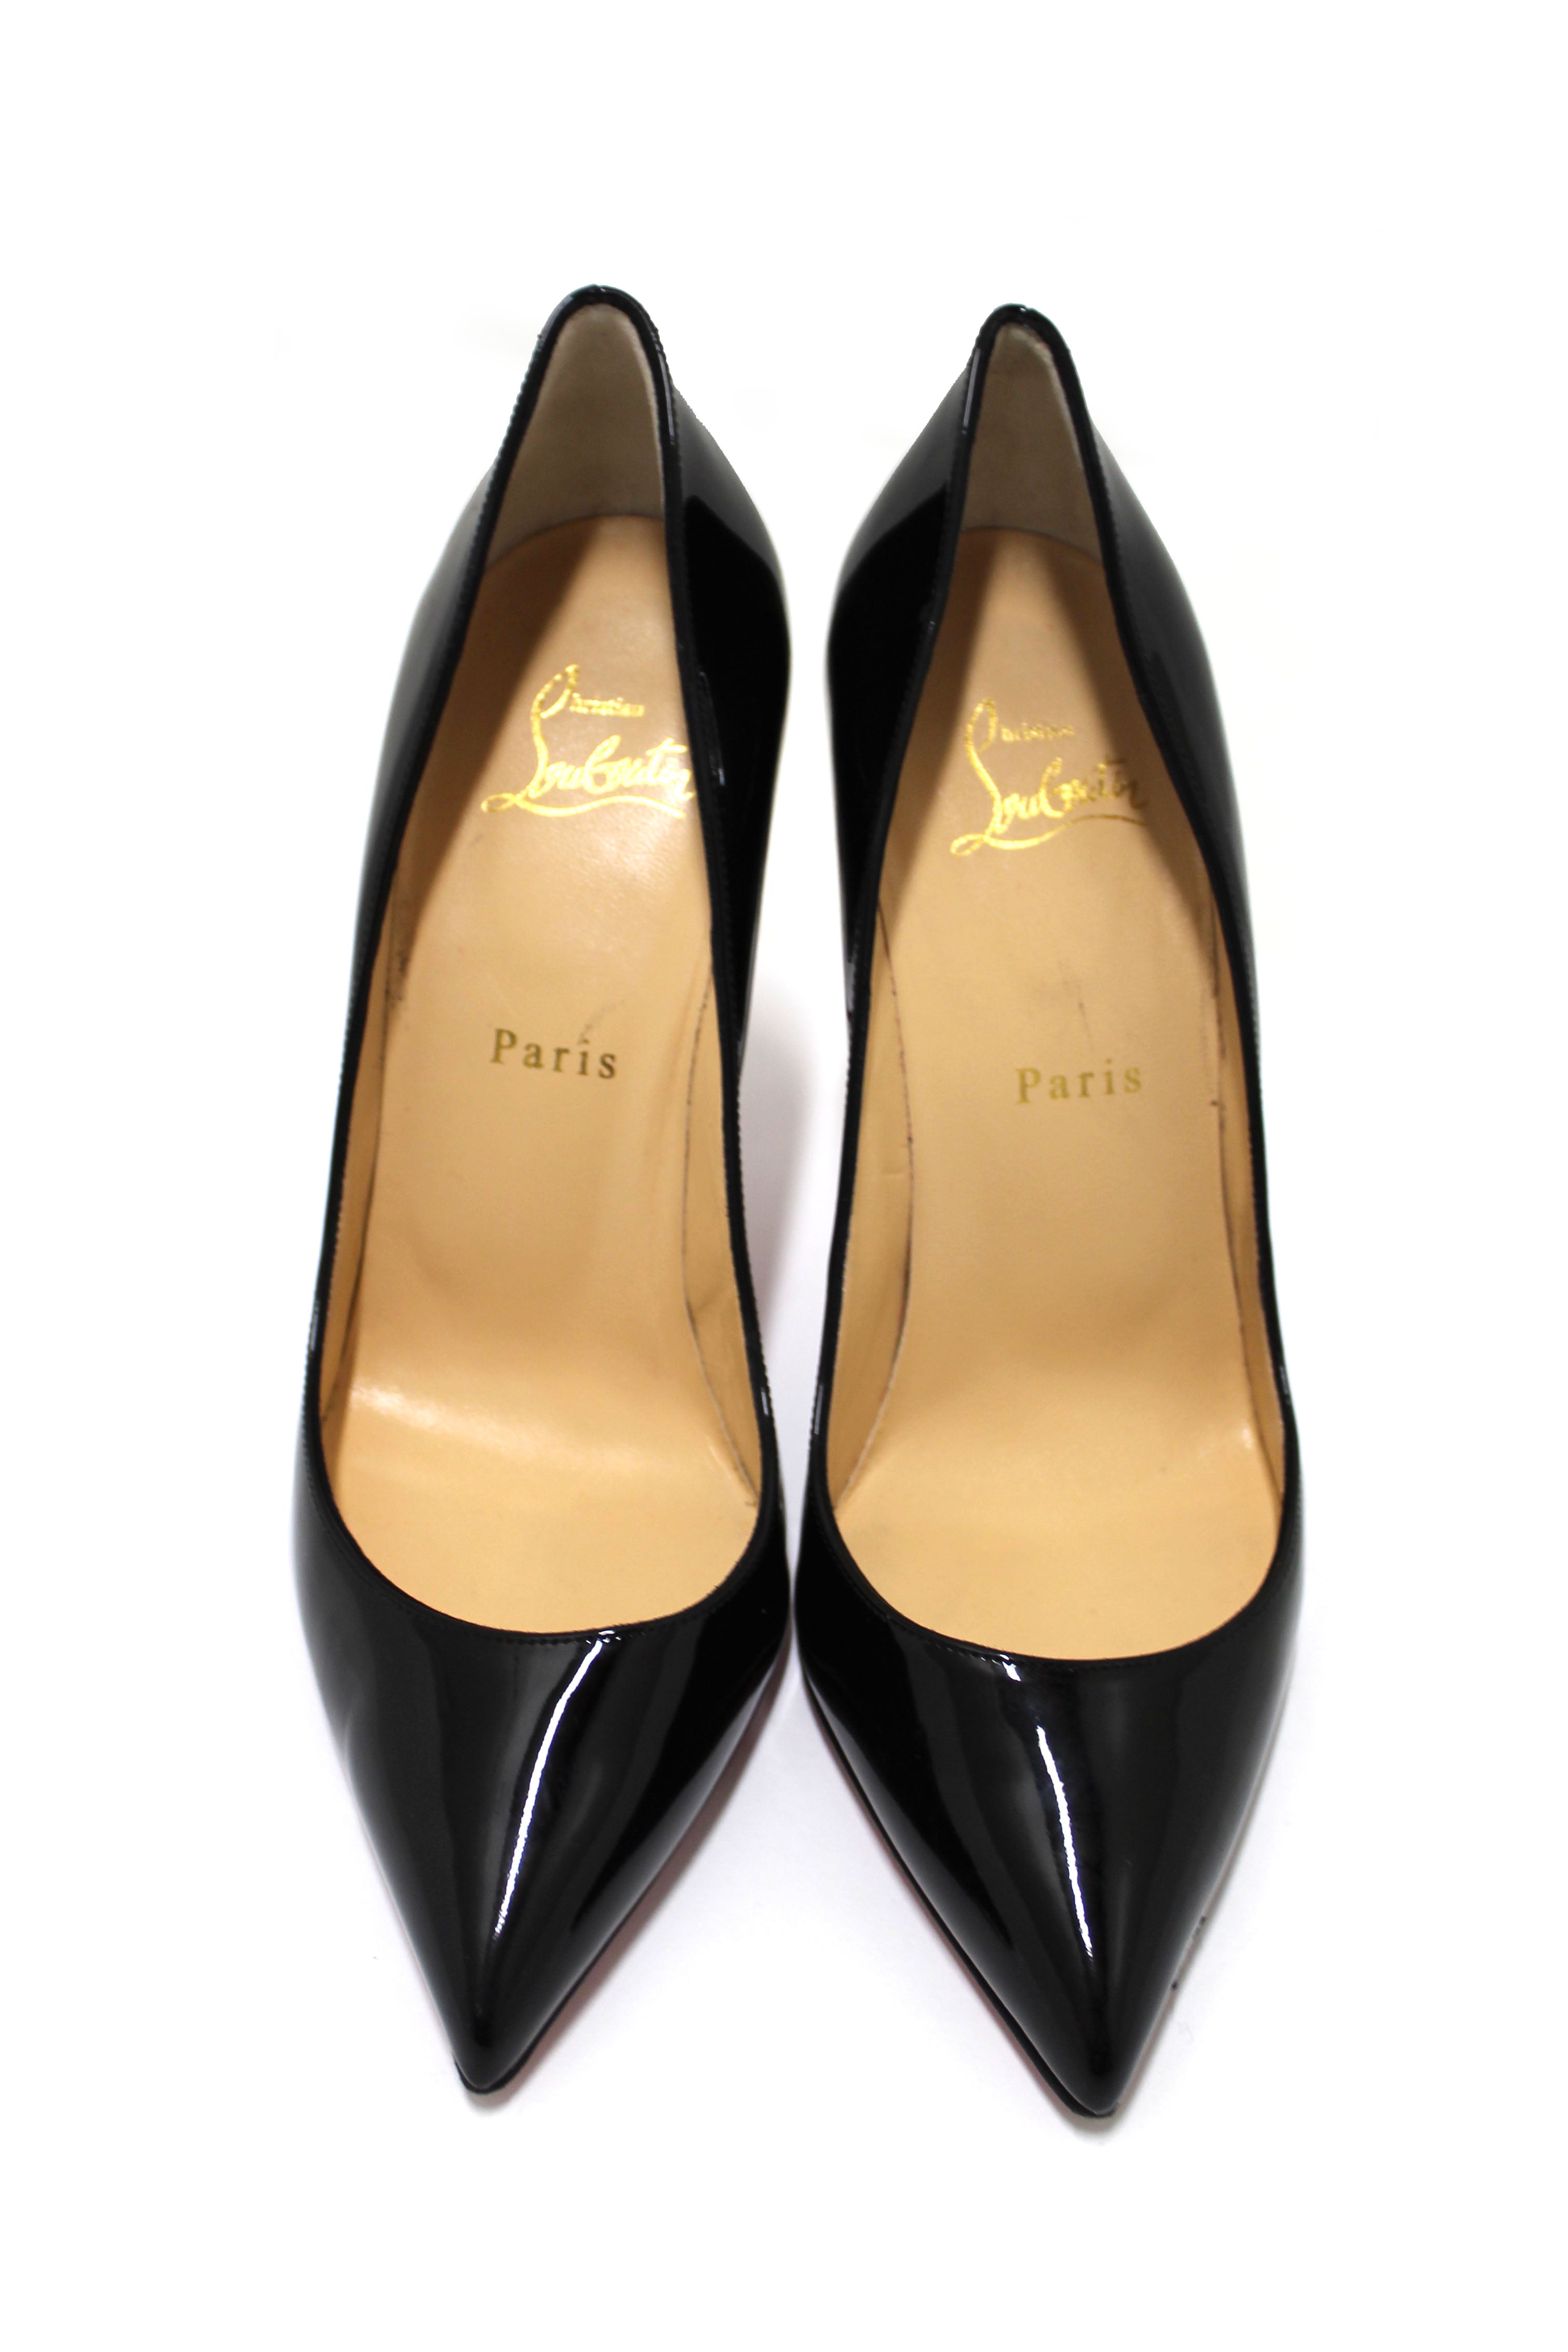 Authentic Christian Louboutin Black So Kate Patent Leather Pump Heels size 38